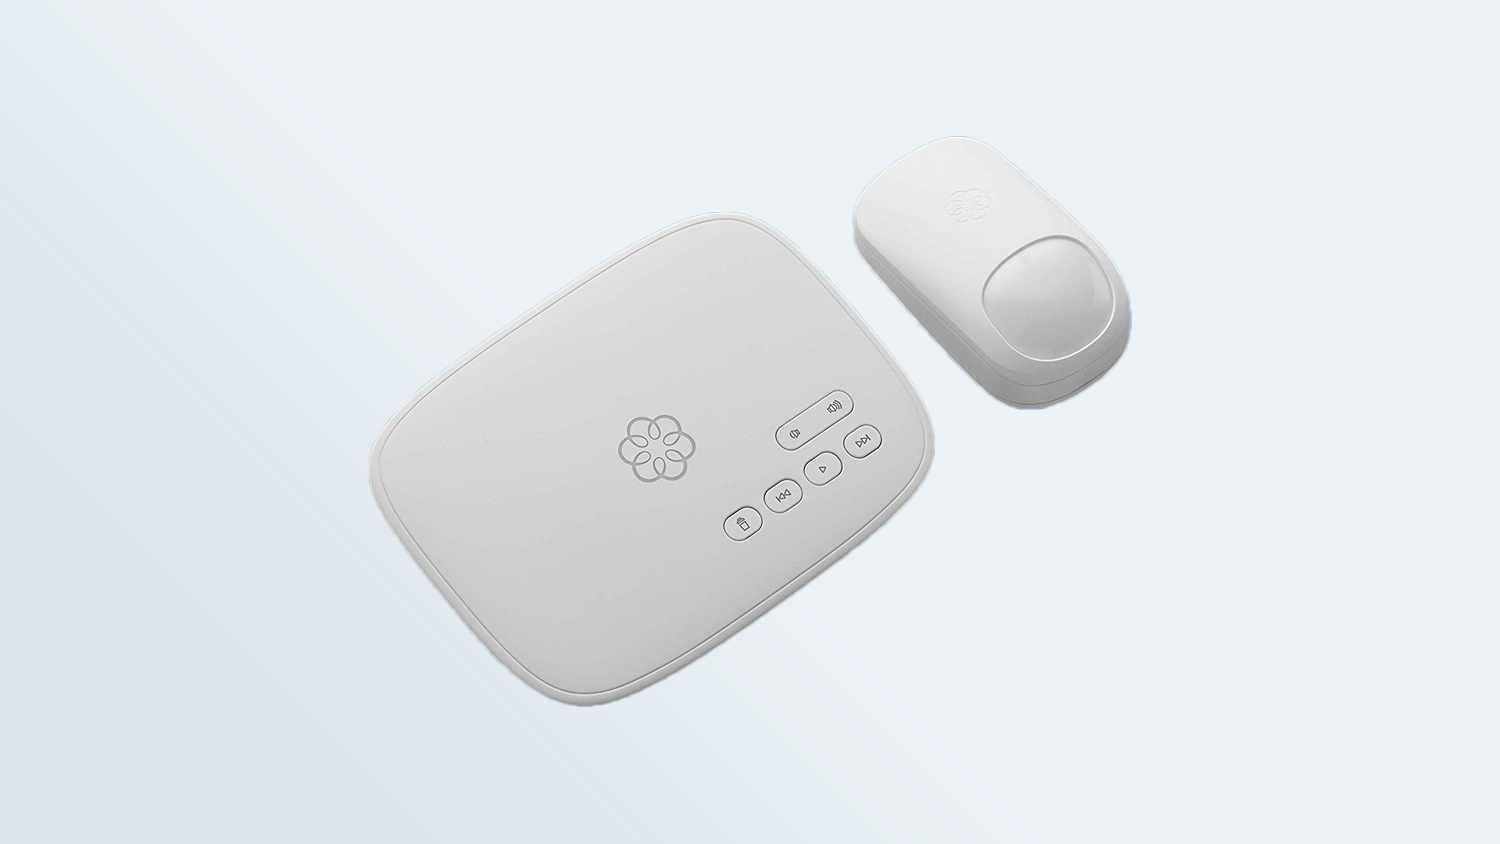 Best DIY home security systems: Ooma Home Security Kit